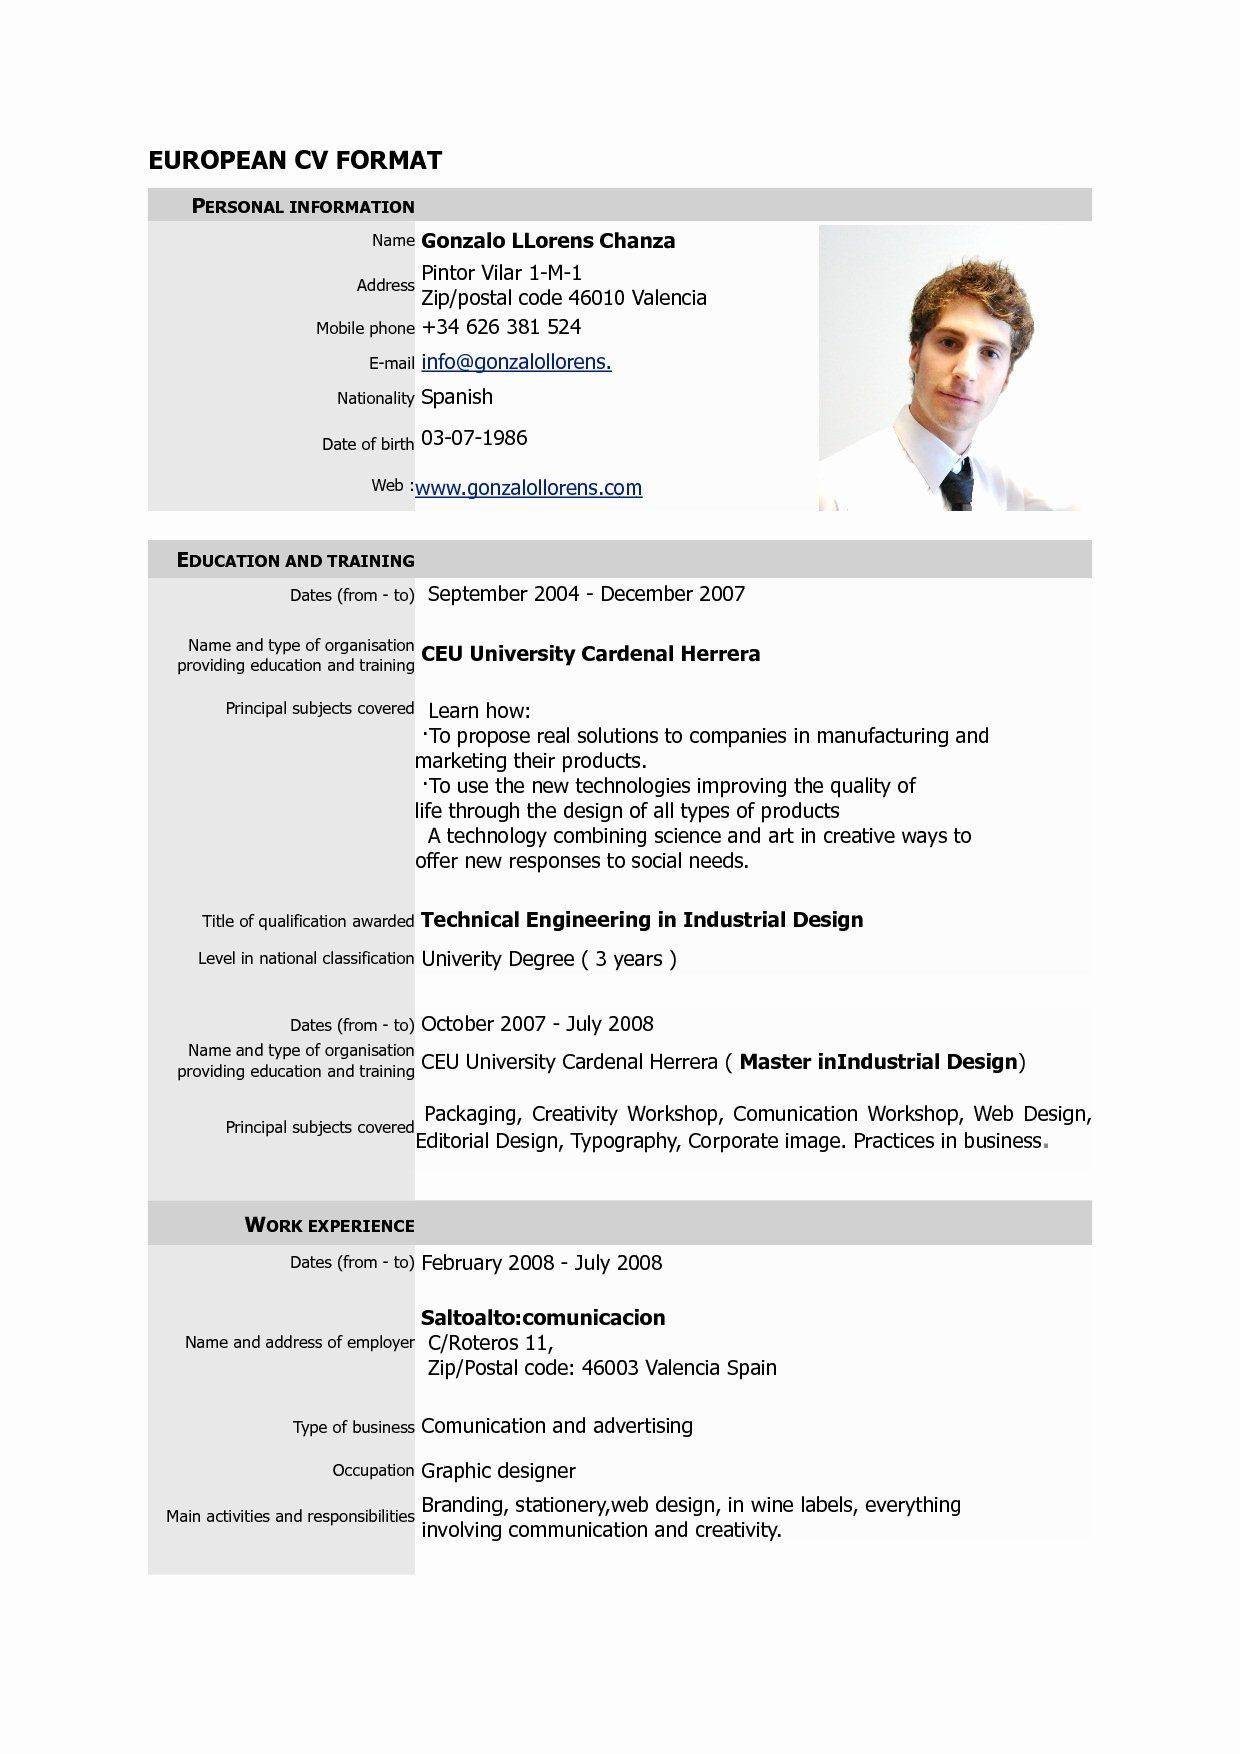 Sample Resume for Job Application In Canada Free Resume Templates Pdf Best Of Canadian Cv format Pdf â Planner …